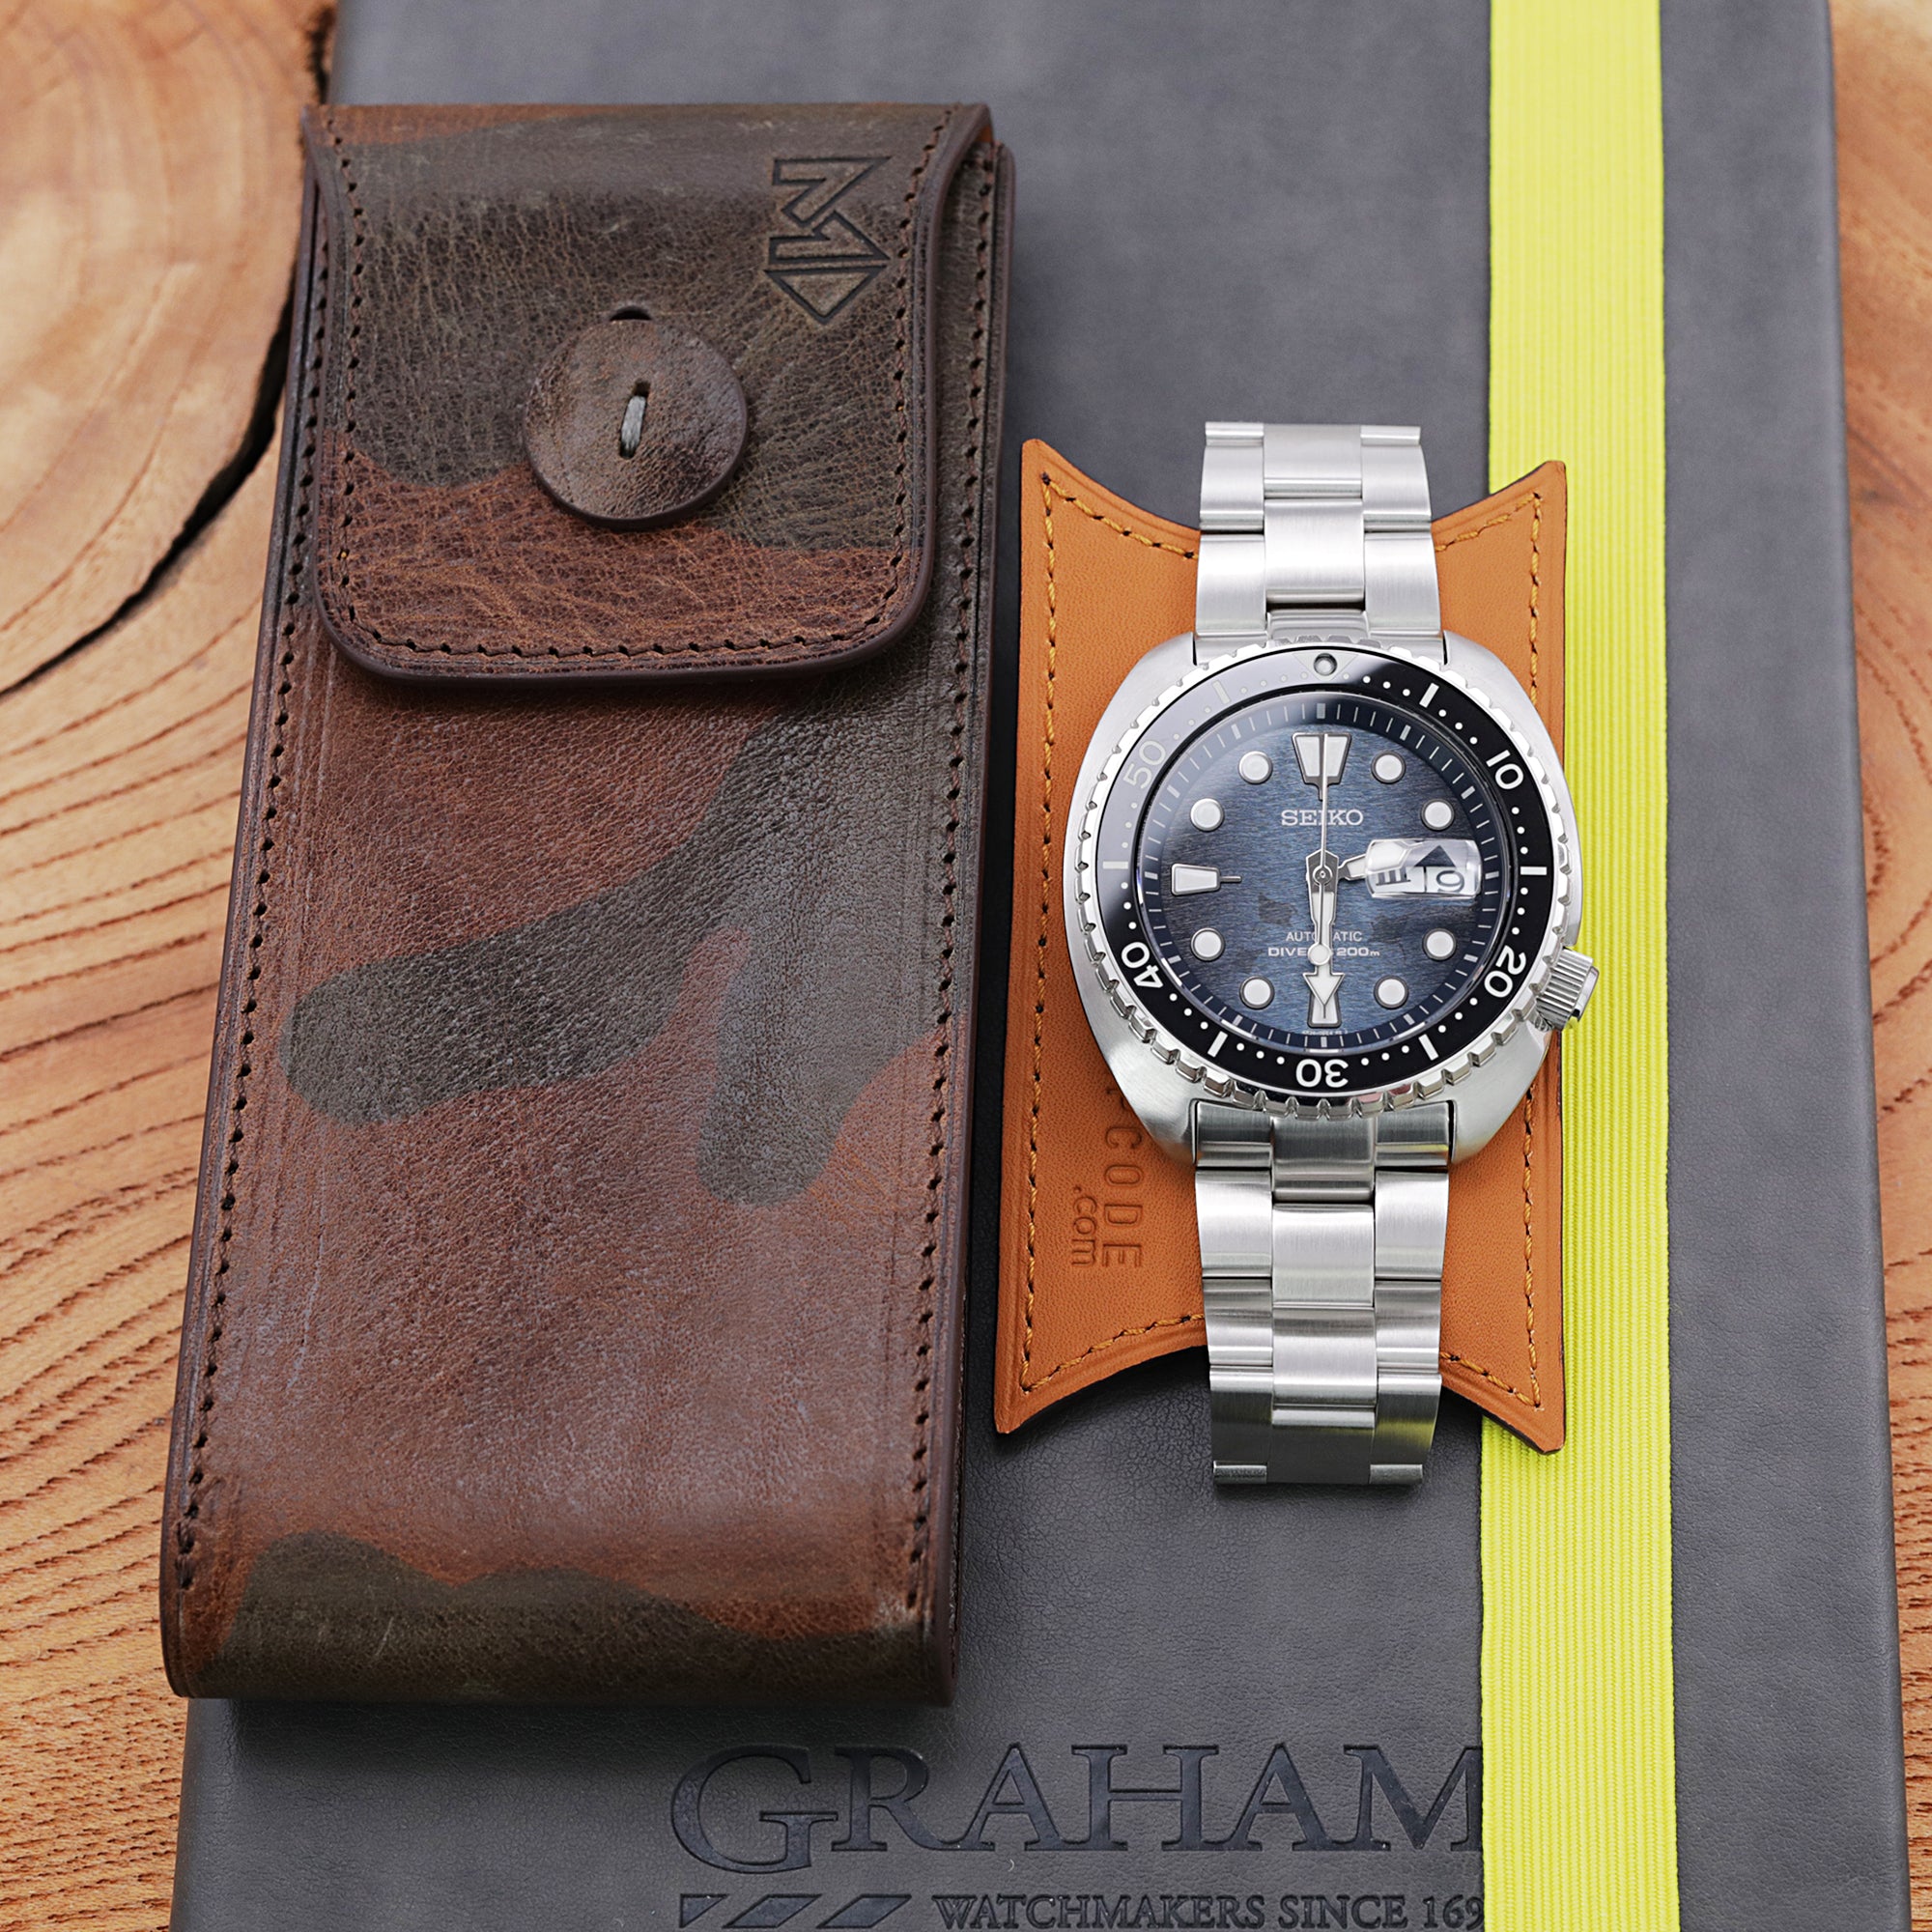 MT-3 Italian Leather Watch Pouch in Camo Pattern for Watch Strap